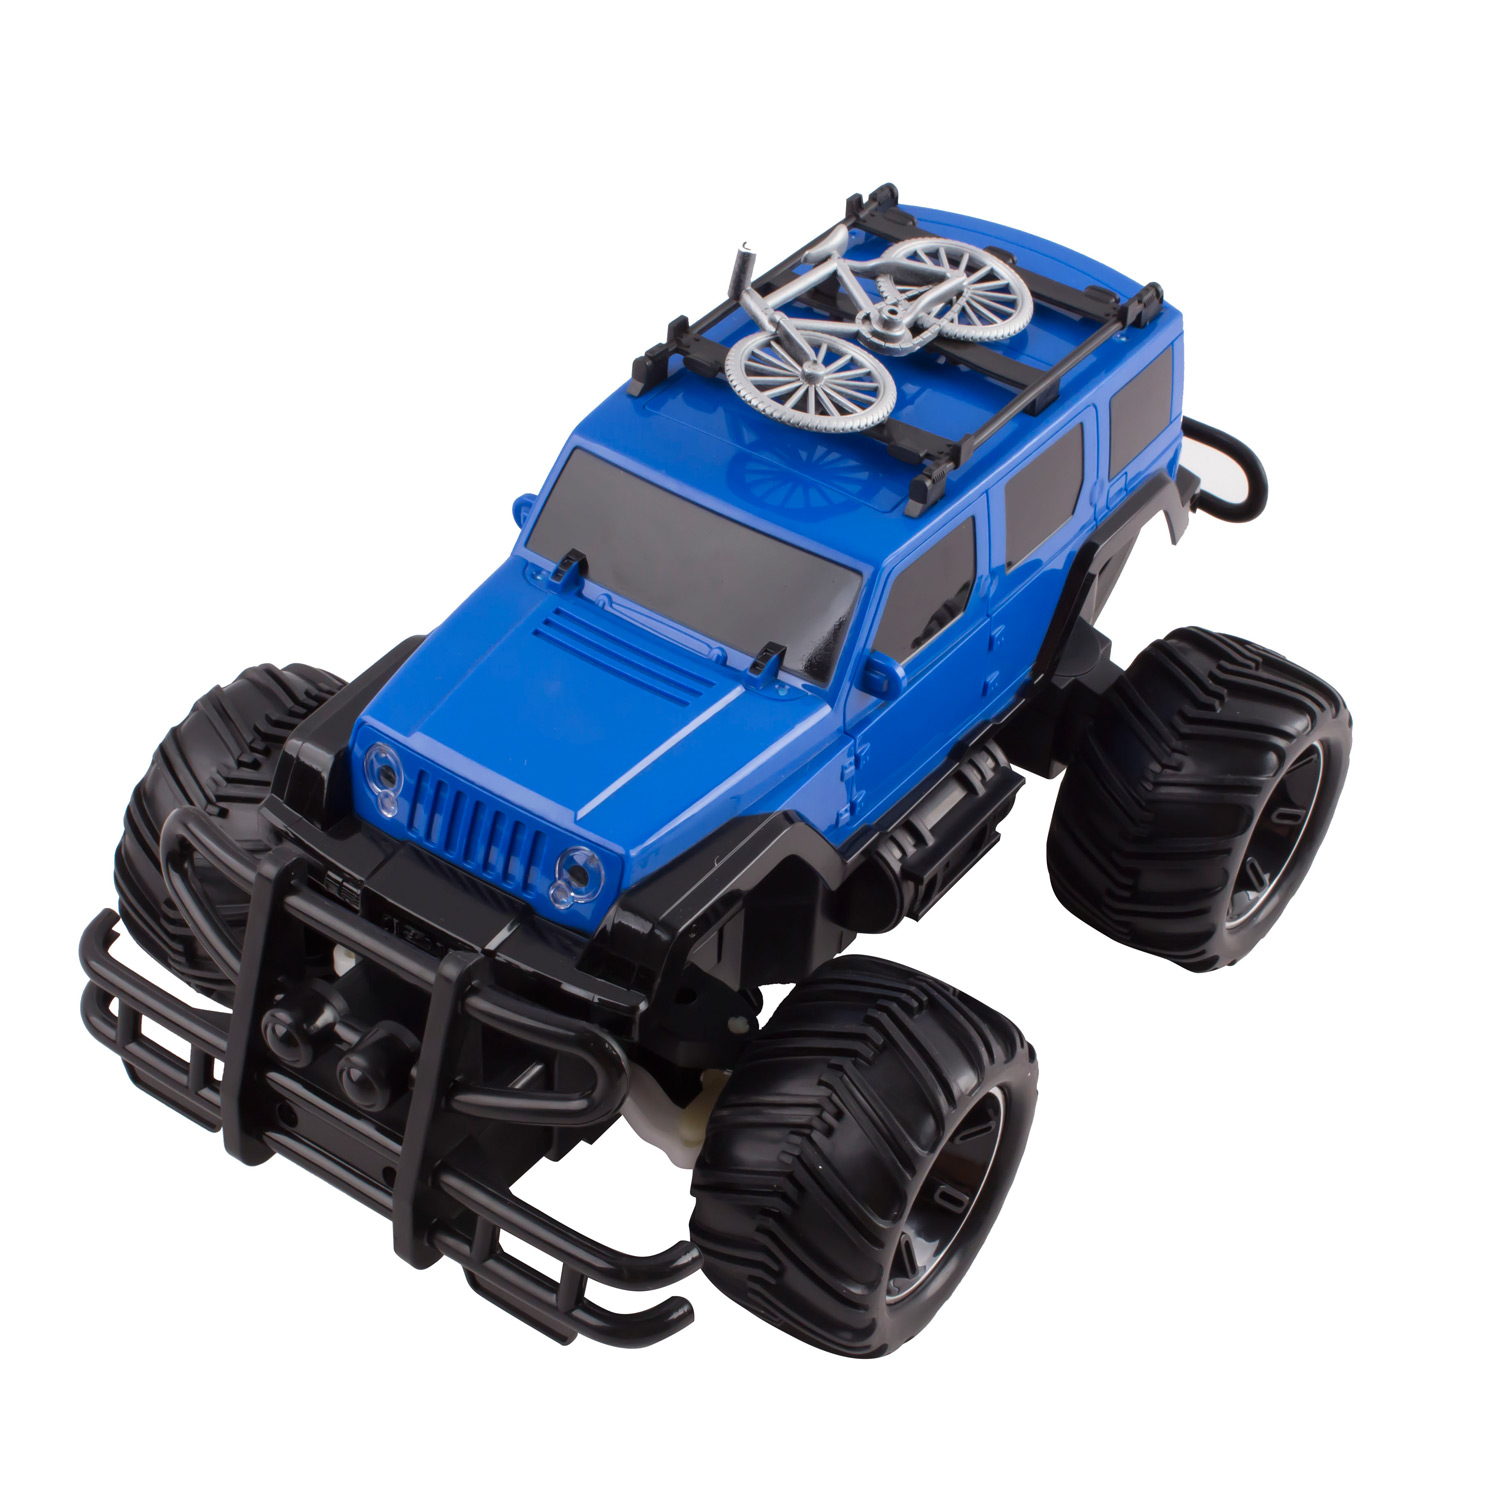 RC Truck Jeep Big Wheel Monster Remote Control Car With LED Headlights Ready to Run Includes Rechargeable Battery 116 Size Off-Road Beast Buggy Toy Blue